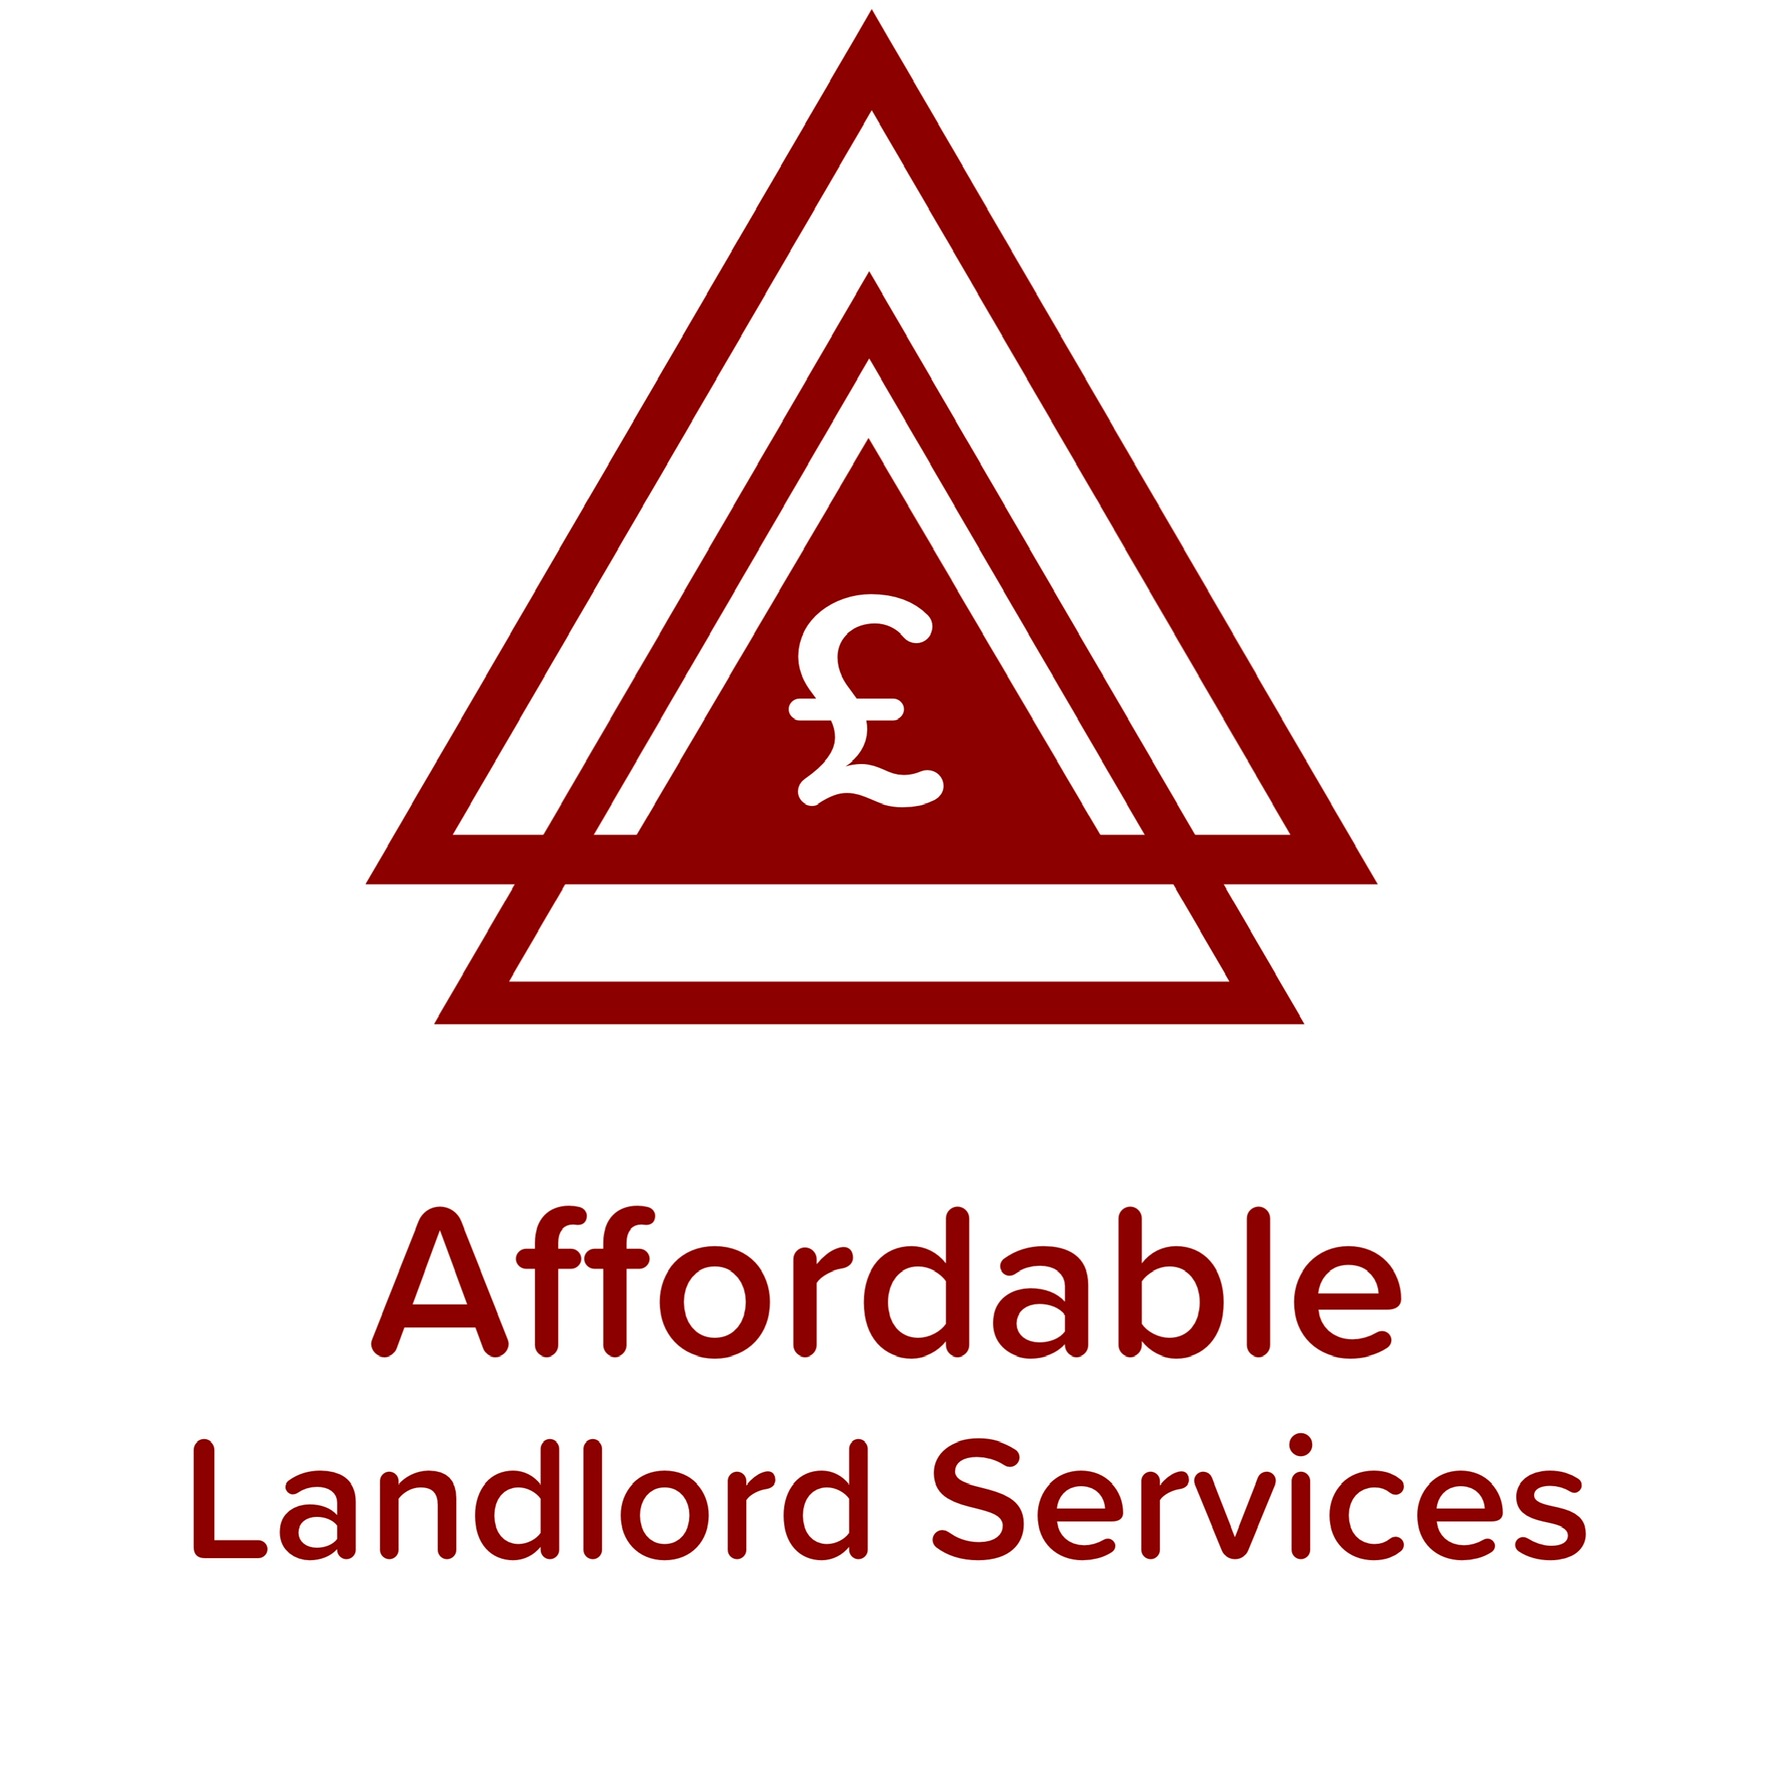 Affordable Landlord Services